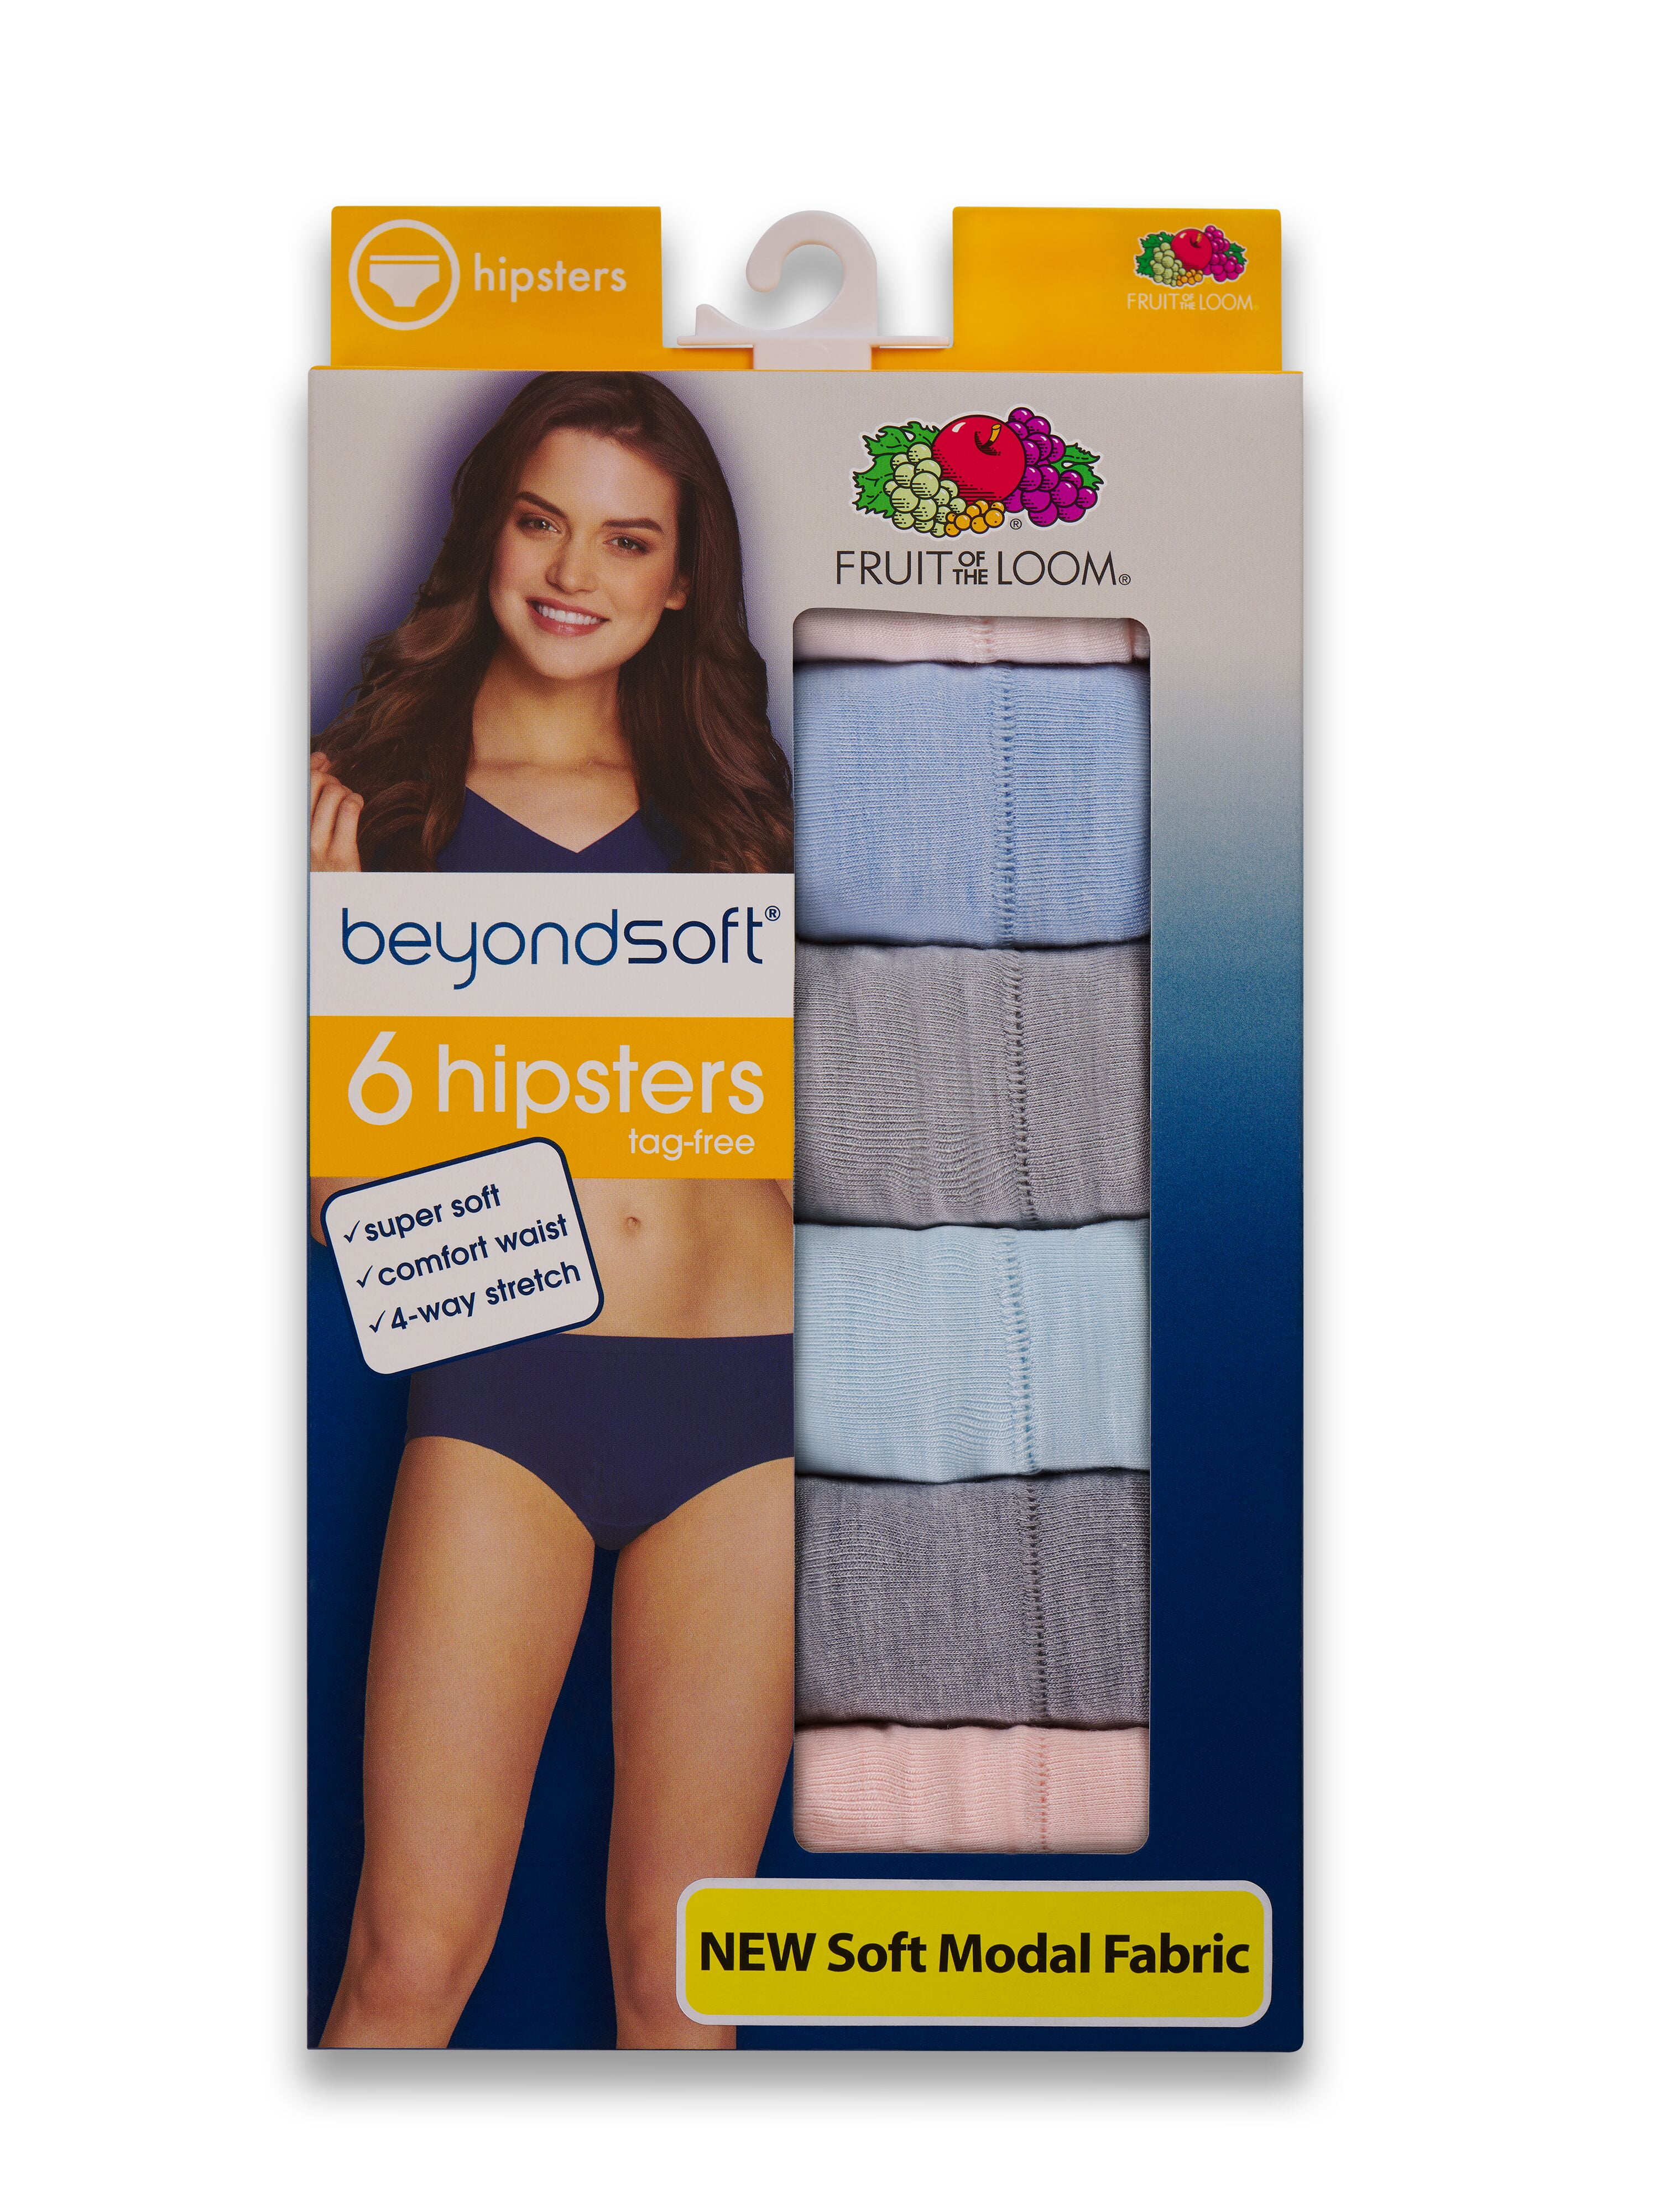 Fruit of the Loom Women's Beyondsoft Modal Hipster Underwear, 12 Pack,  Sizes S-2XL